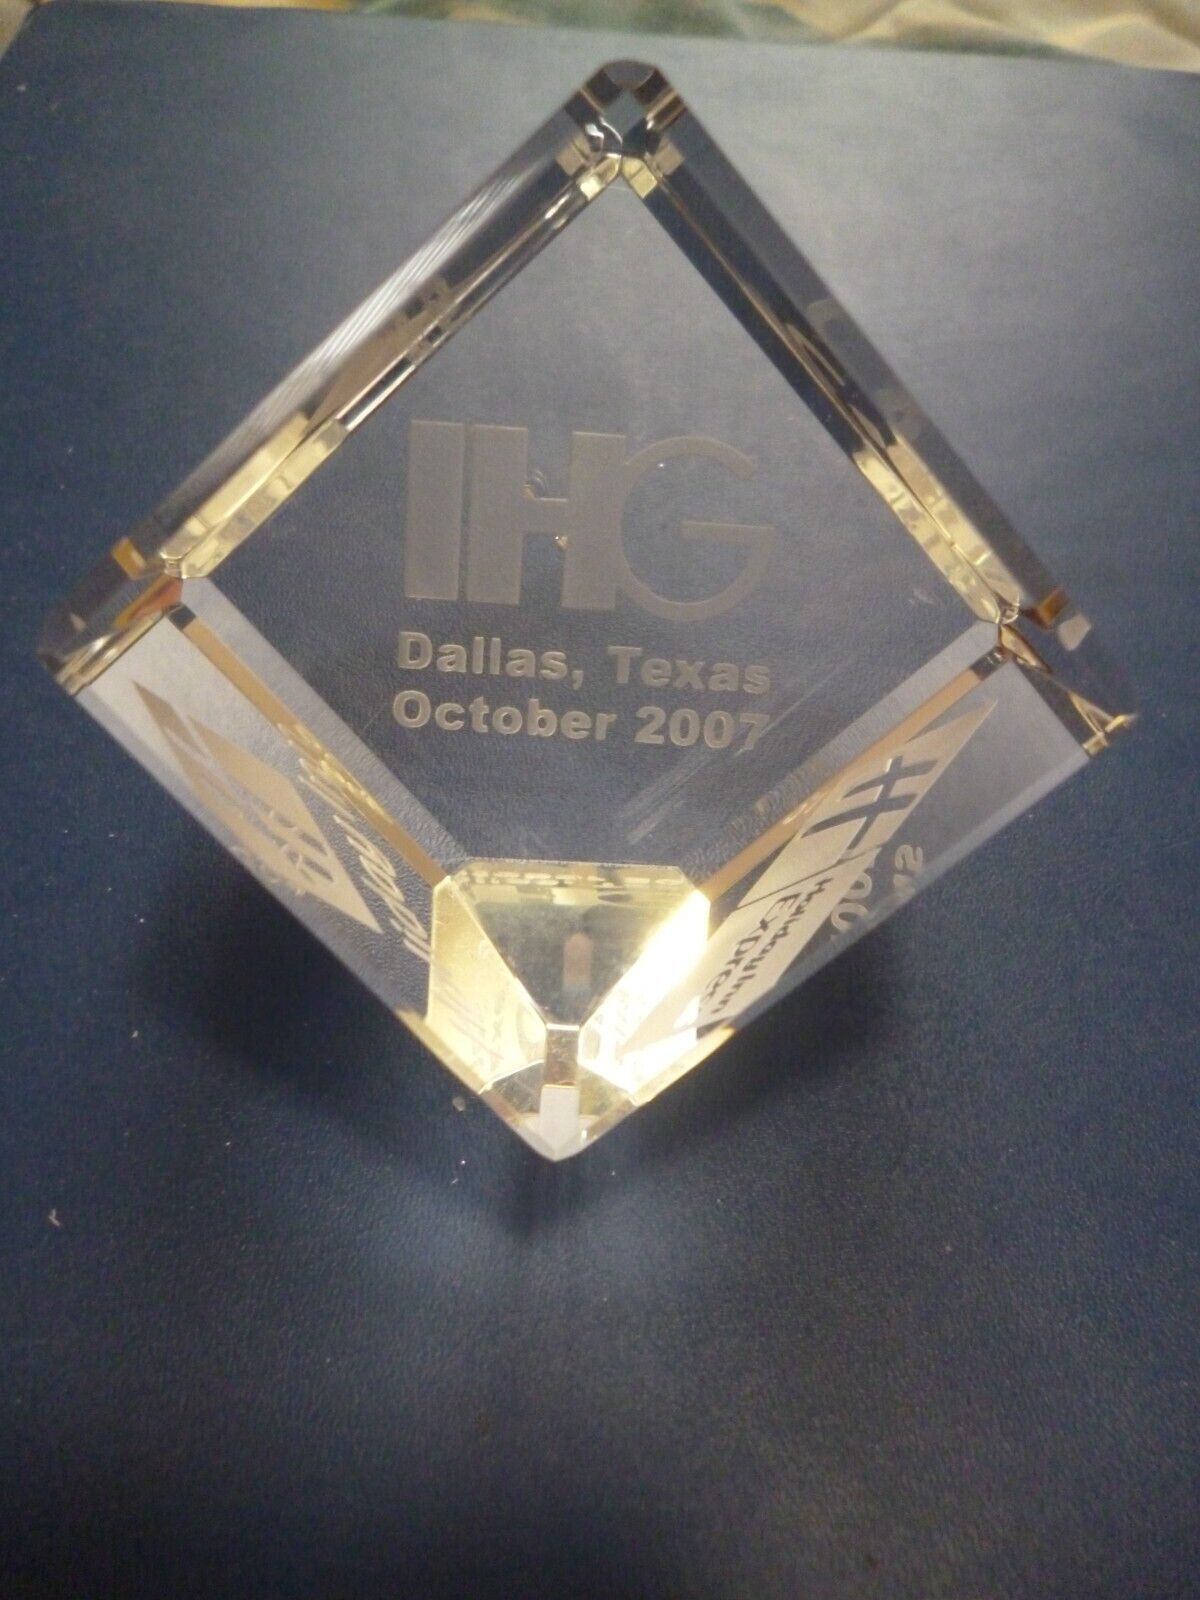 IHG / Holiday Inn 2007 conference paperweight + 2000 Quality Excellence Award